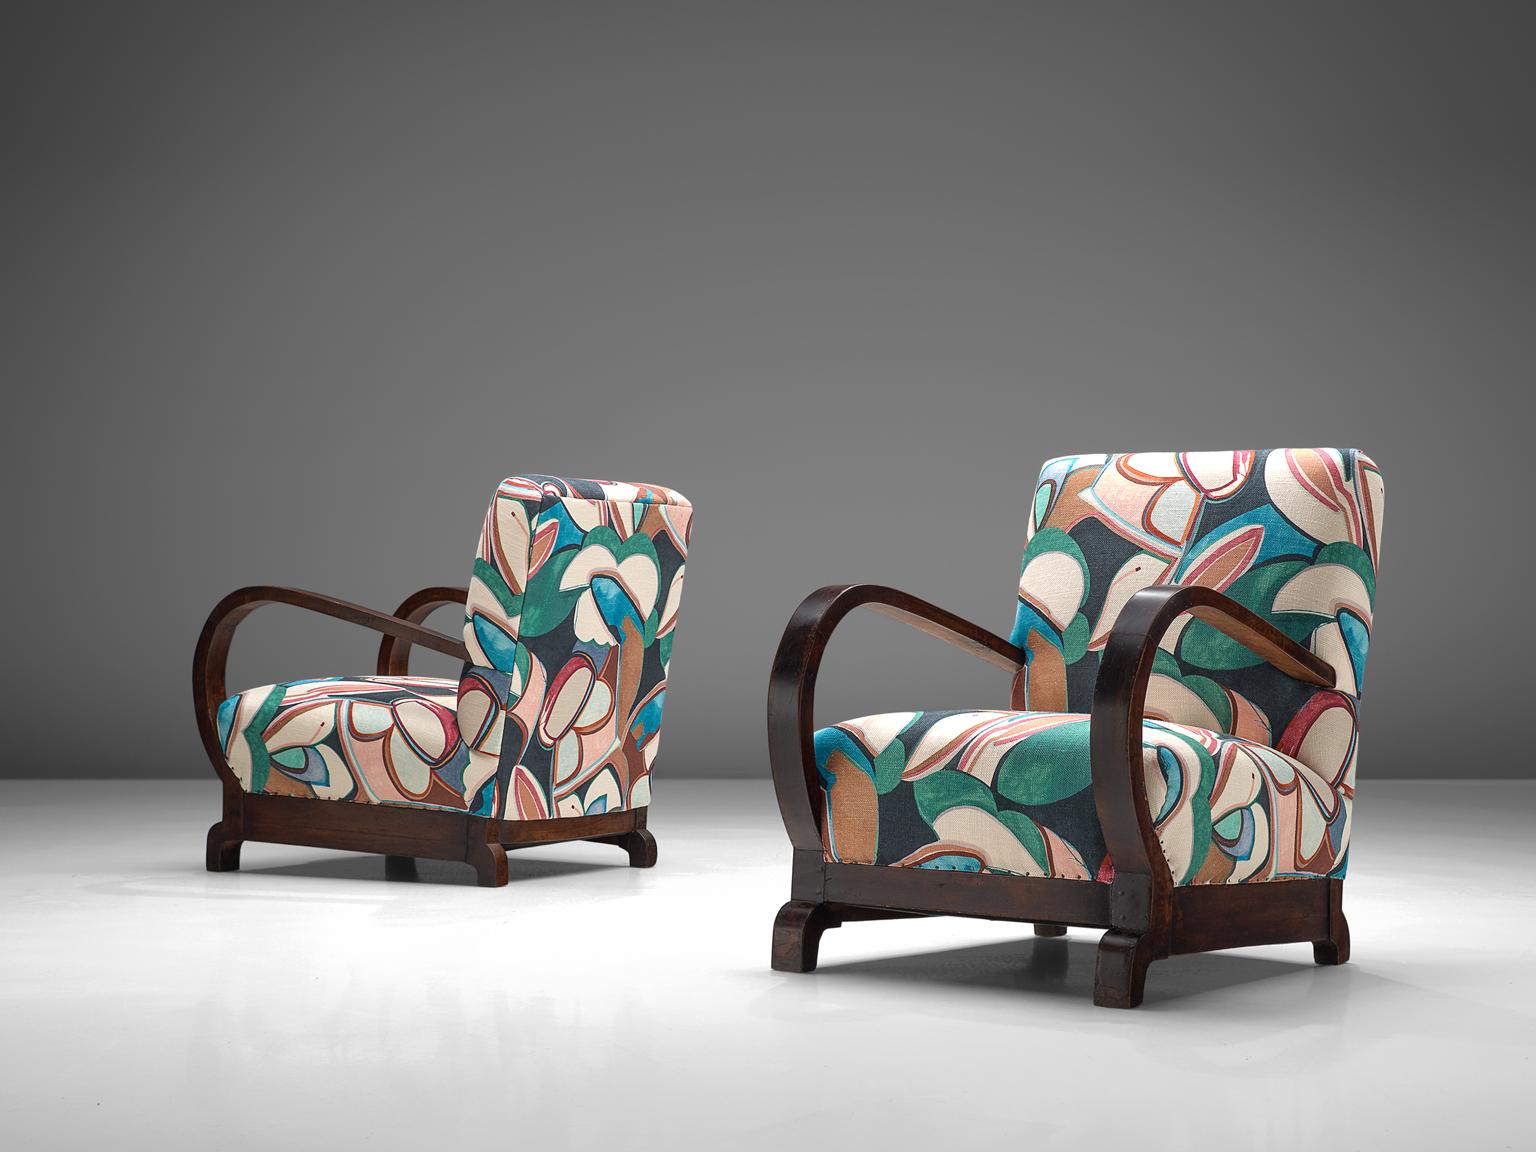 Set of two lounge chairs, floral fabric in green, blue and pink, lacquered and stained oak, Europe, 1930s. 

This extraordinary pair of chairs are customized by the experienced craftsmen in our in-house atelier. The chairs are upholstered with a